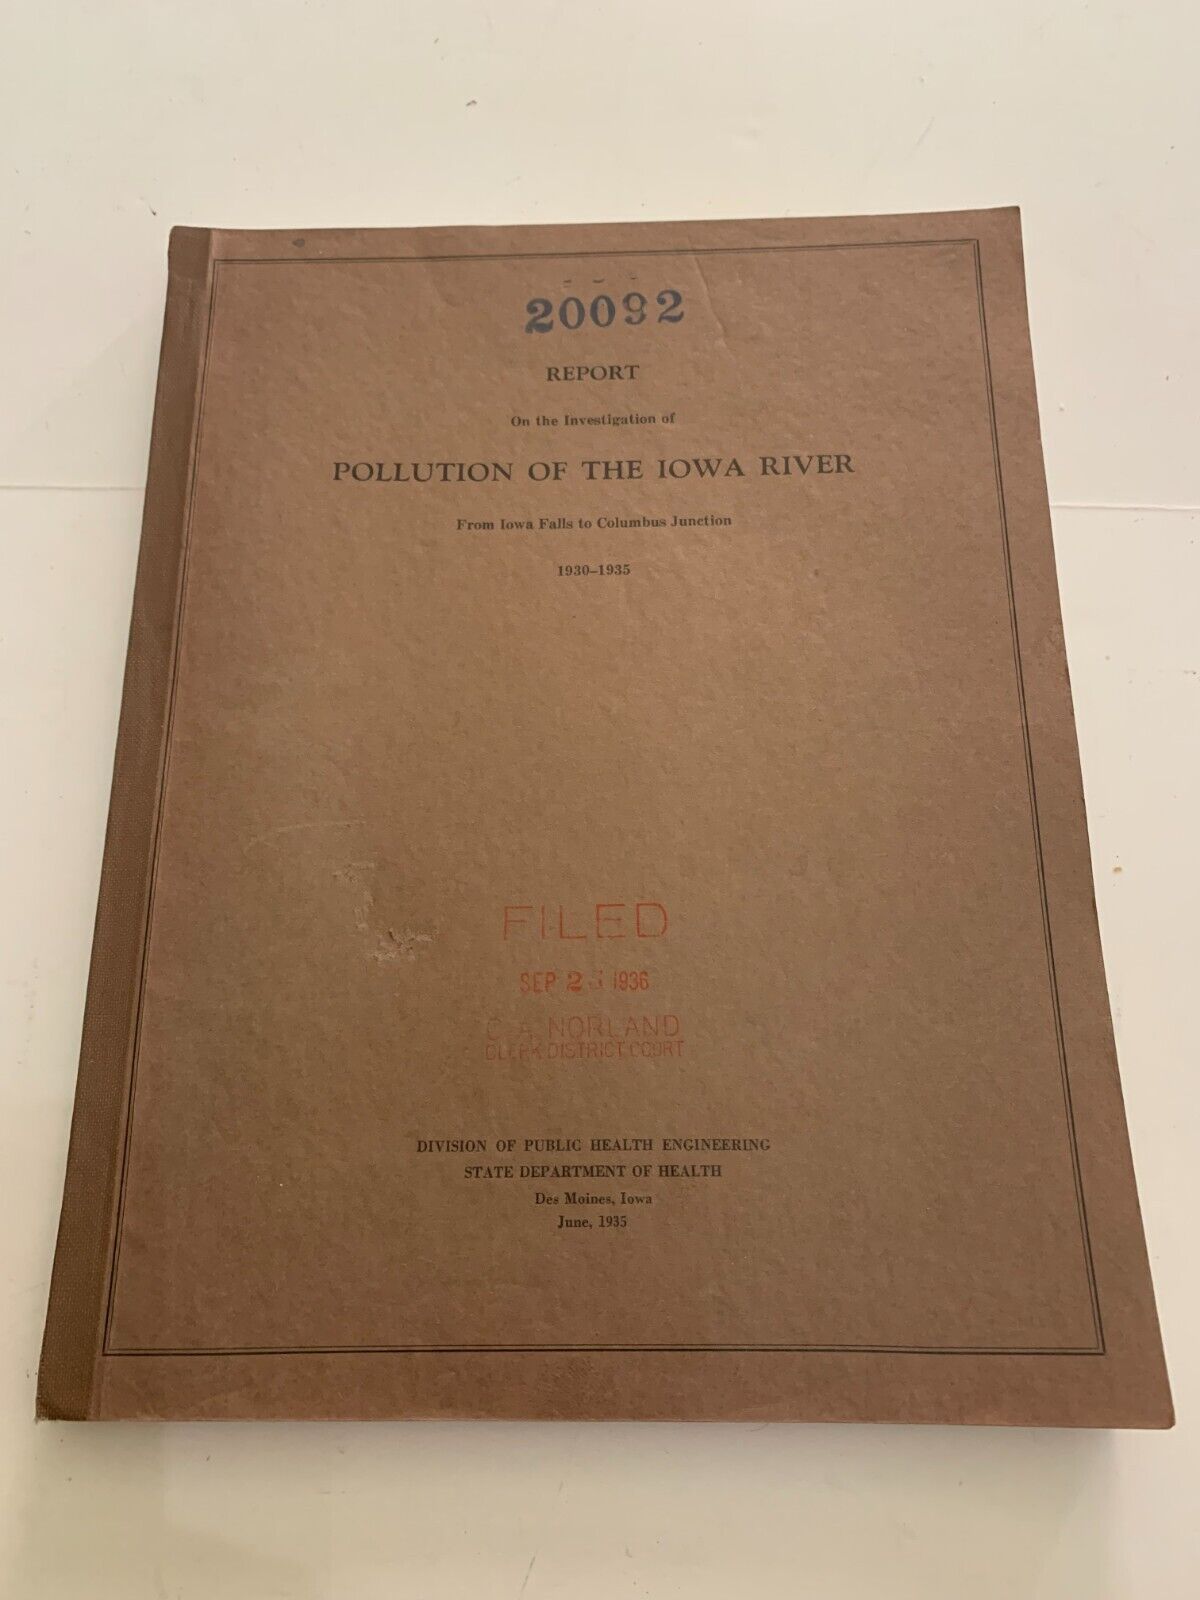 1930-1935 Report On The Investigation Of Pollution Of The Iowa River